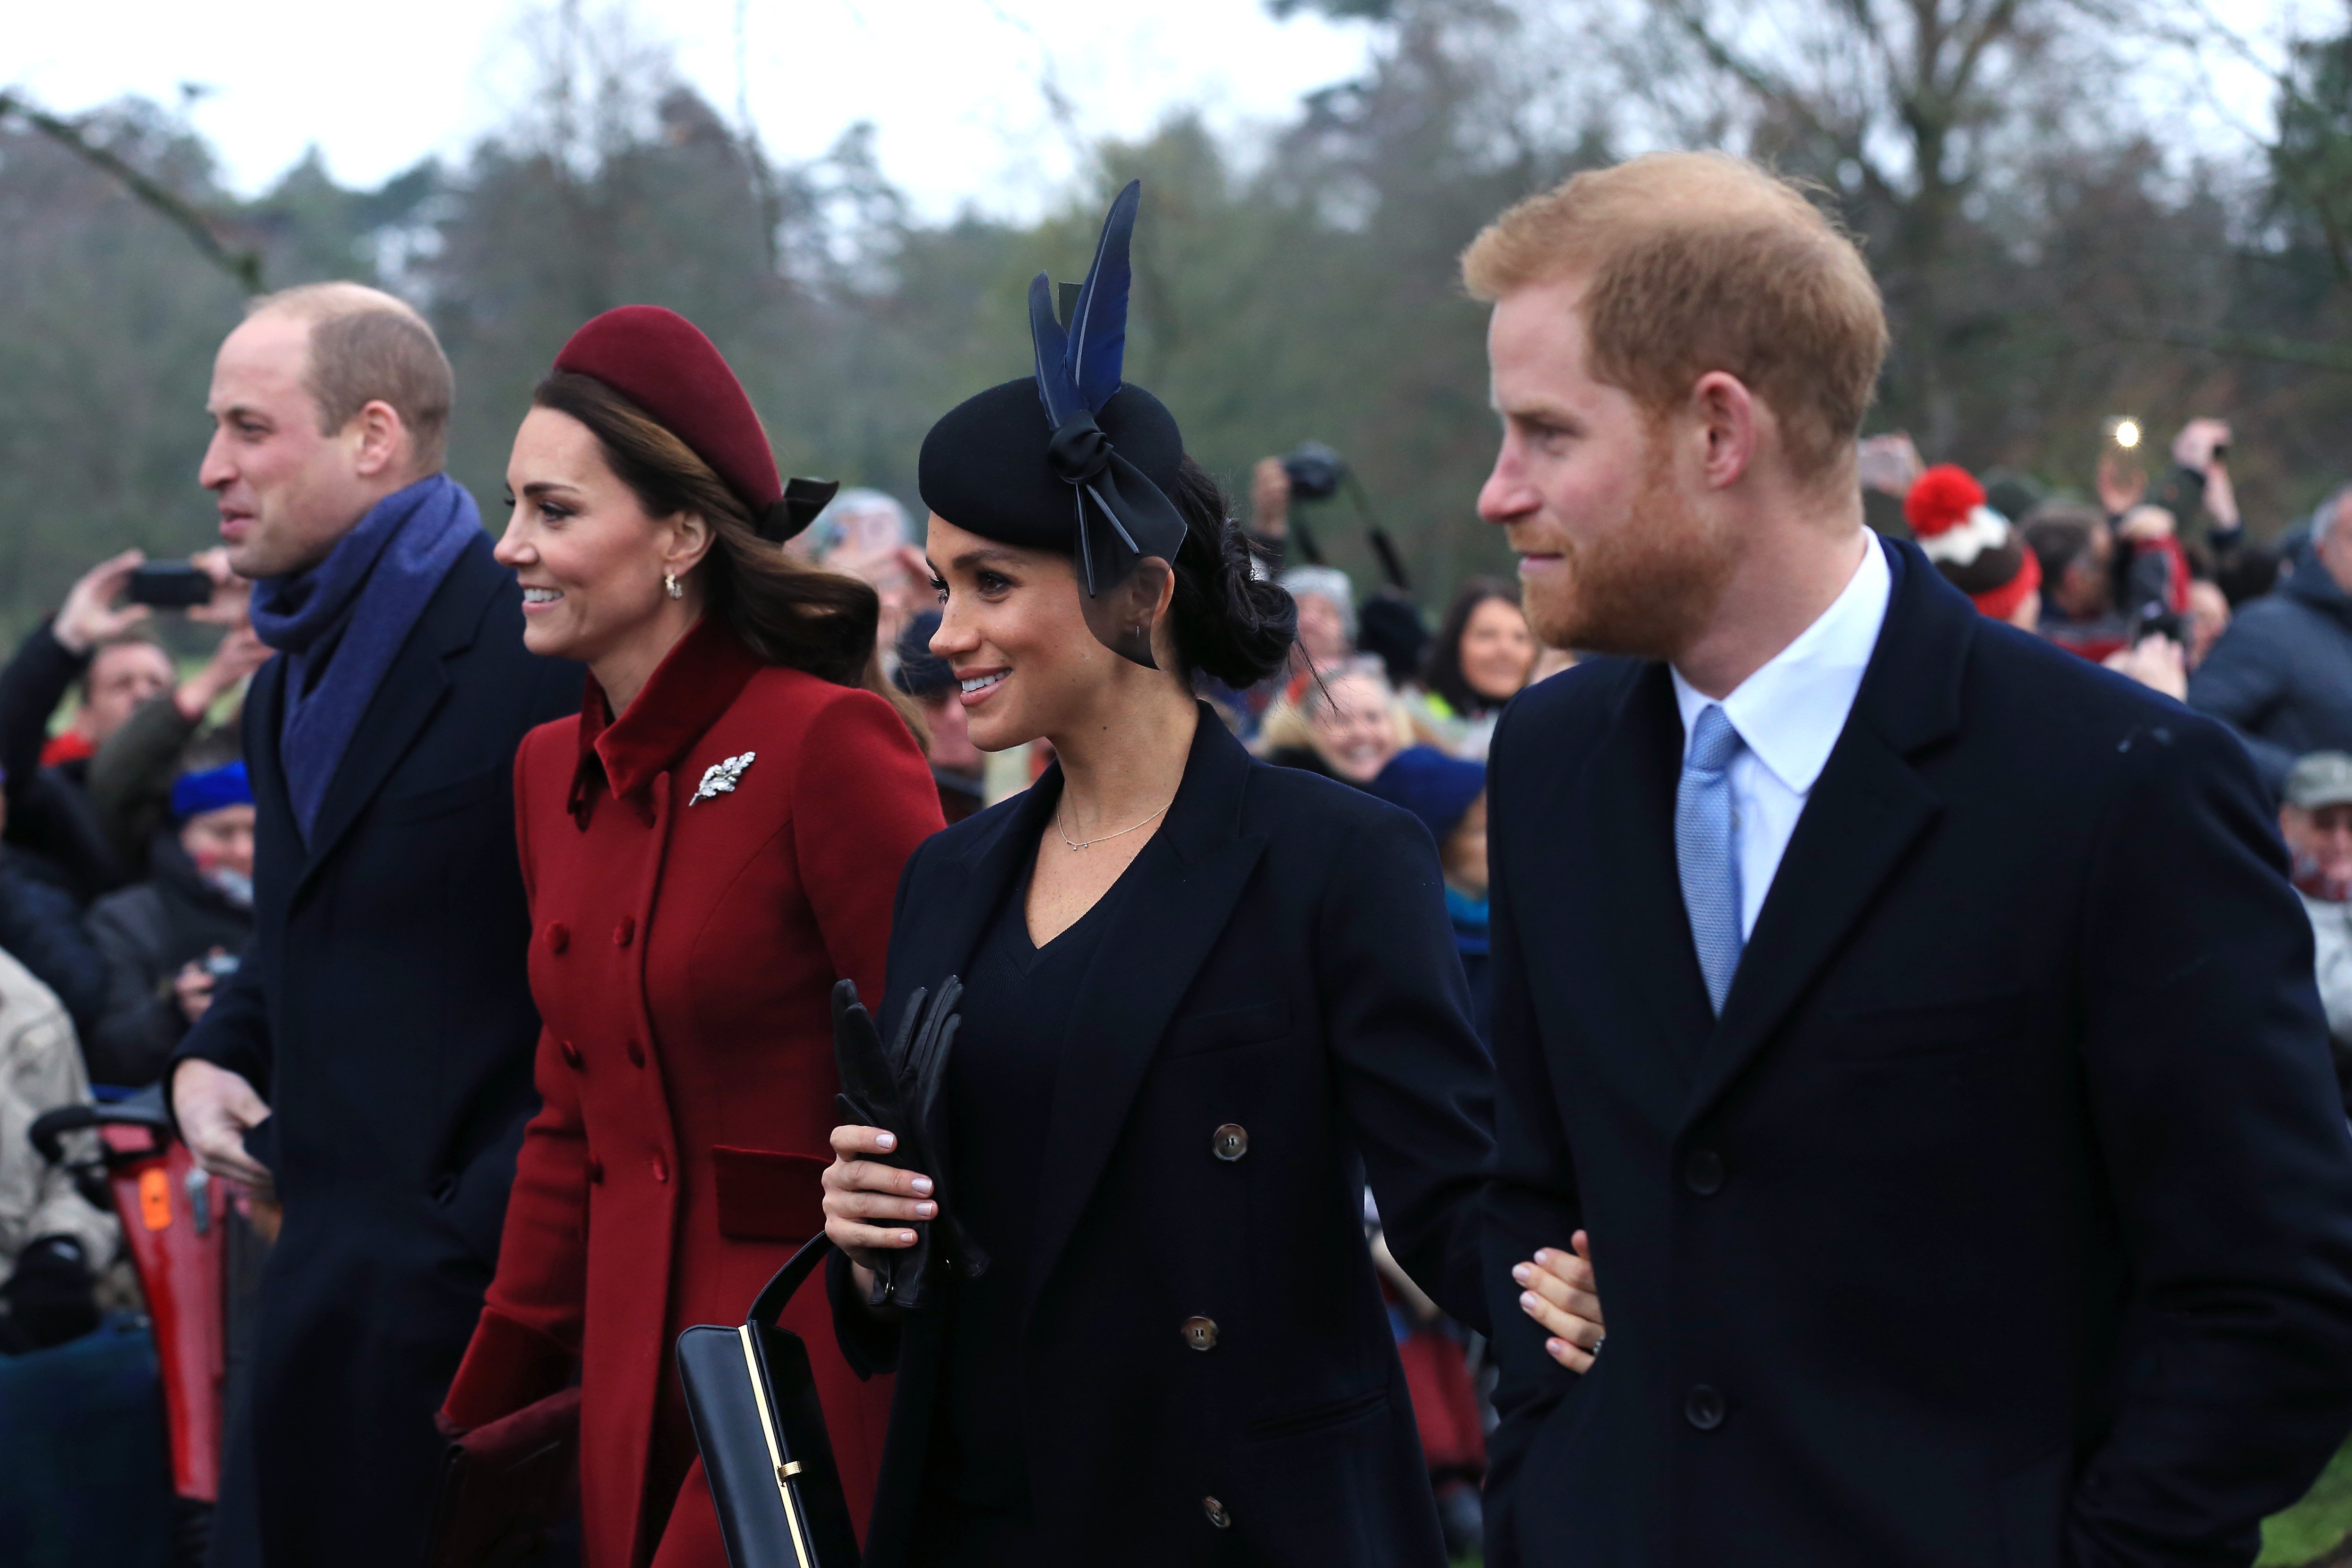 Prince William, Kate Middleton, Meghan Markle, and Prince Harry attending Christmas Day Church service